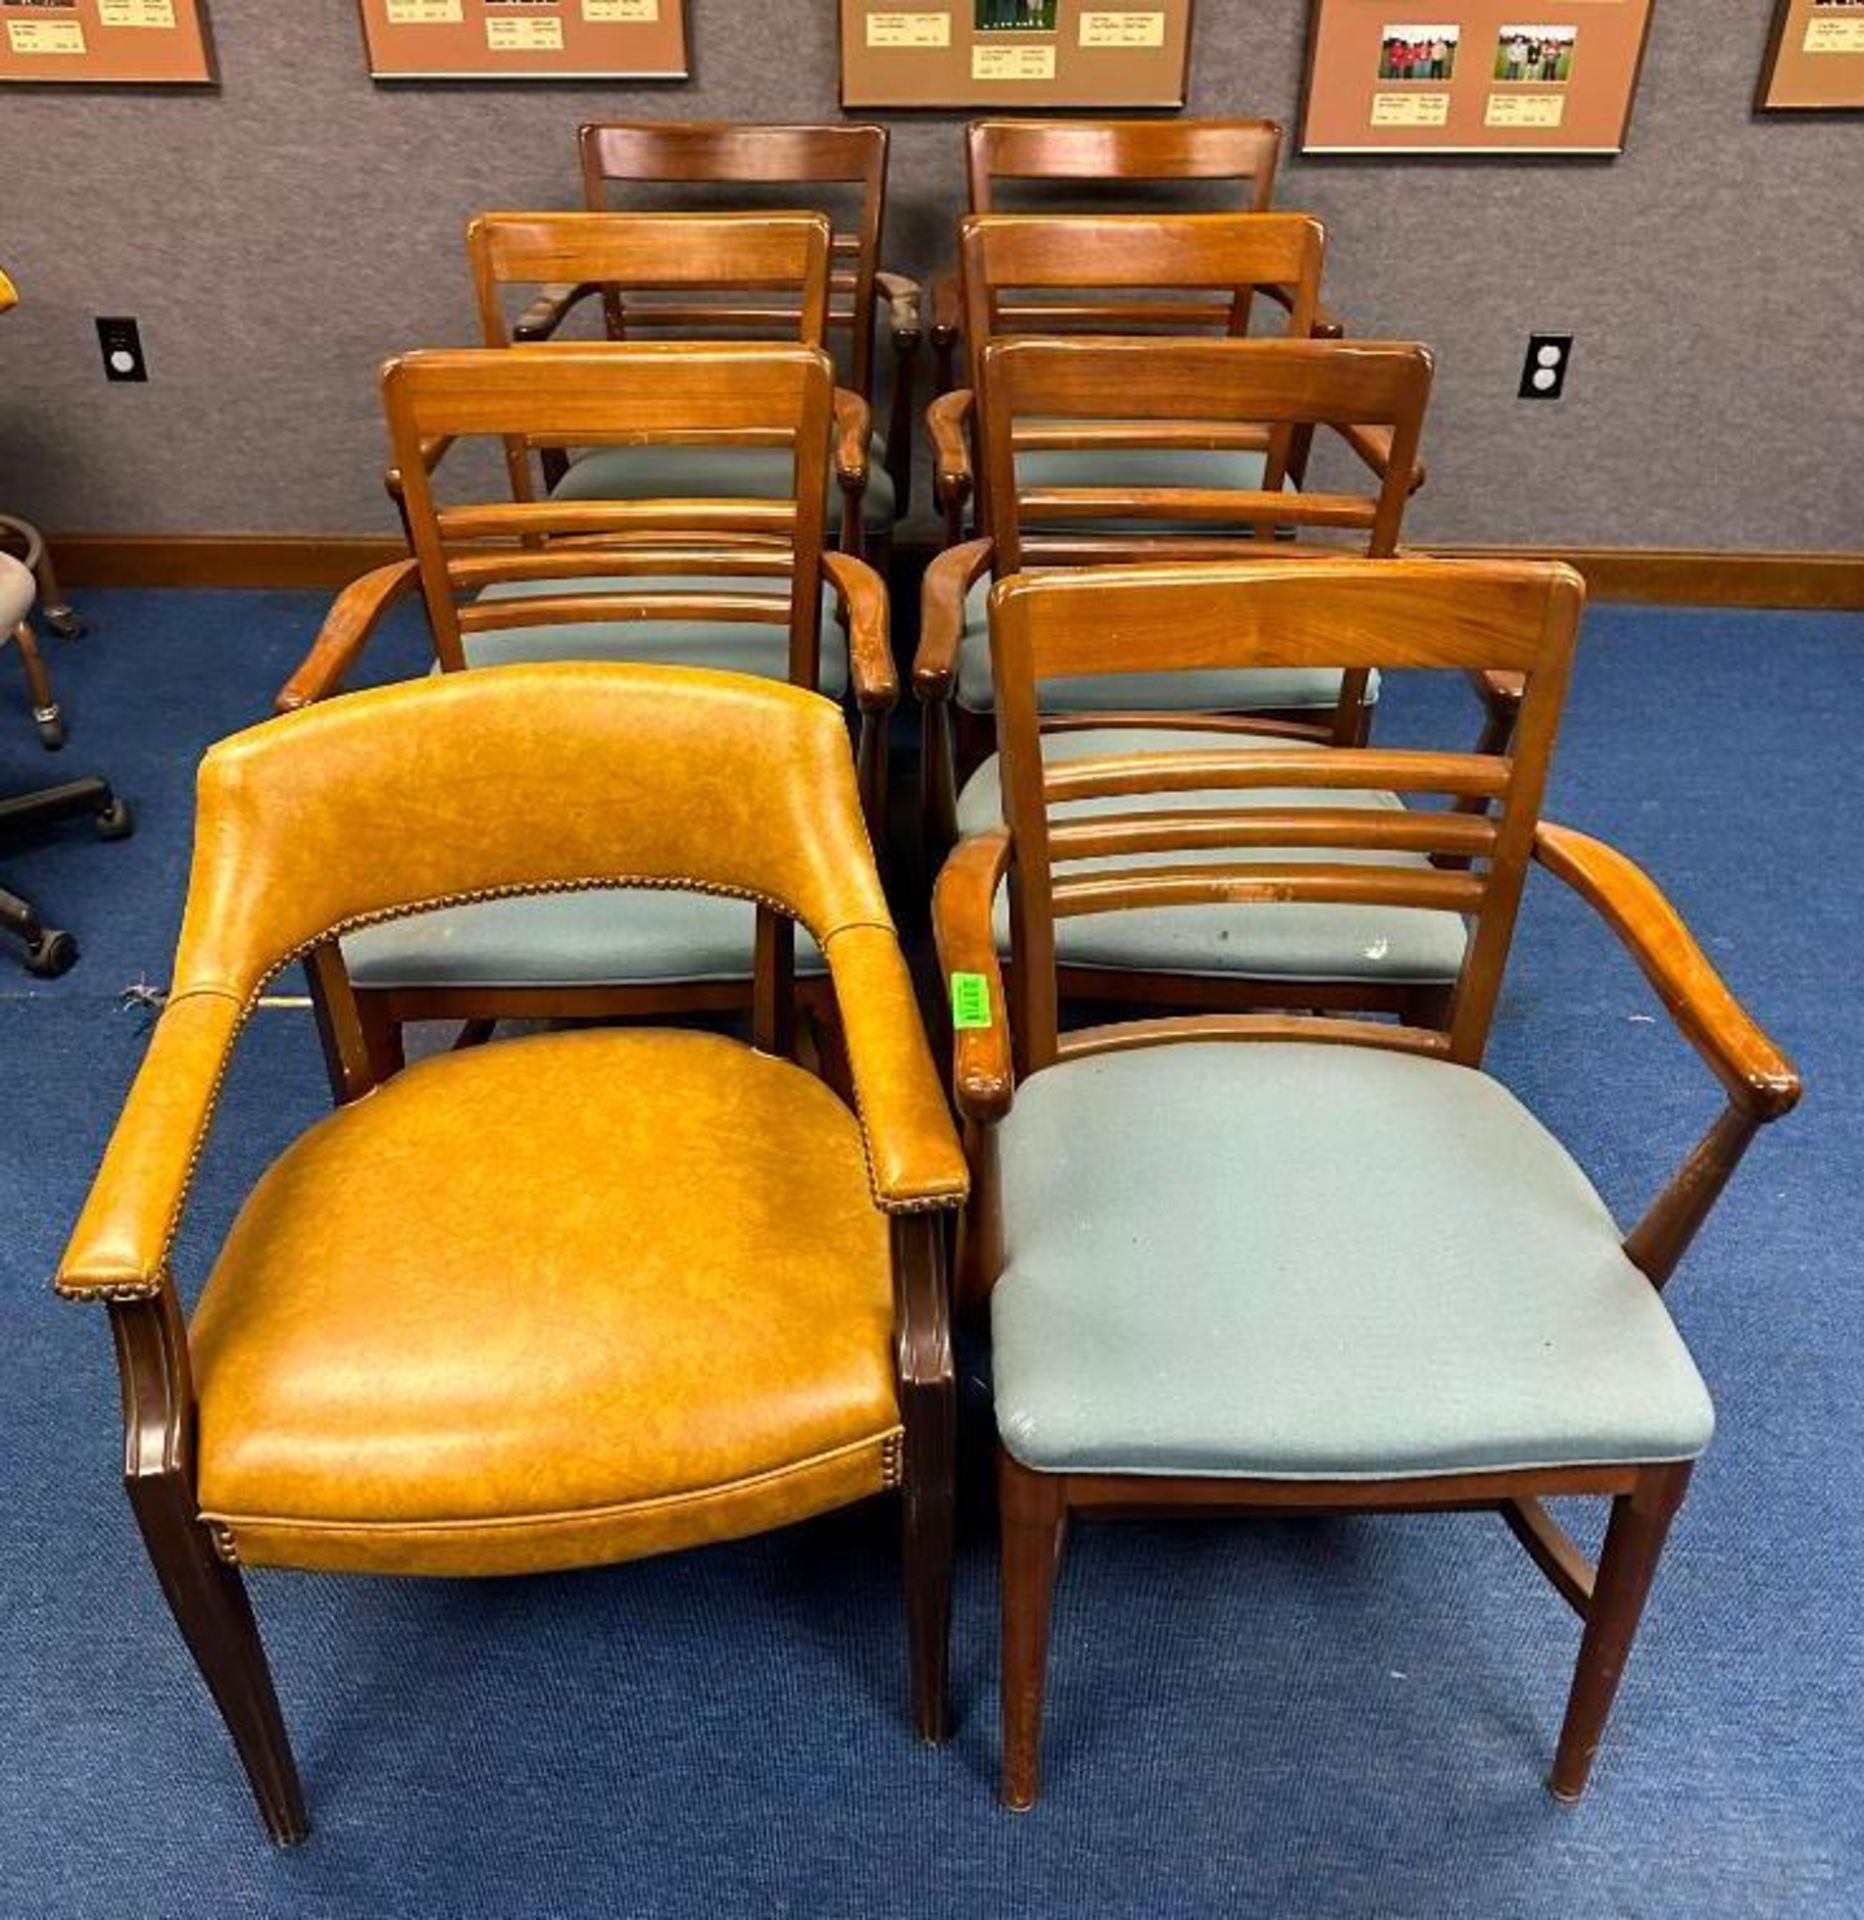 ASSORTED OFFICE CHAIRS AS SHOWN